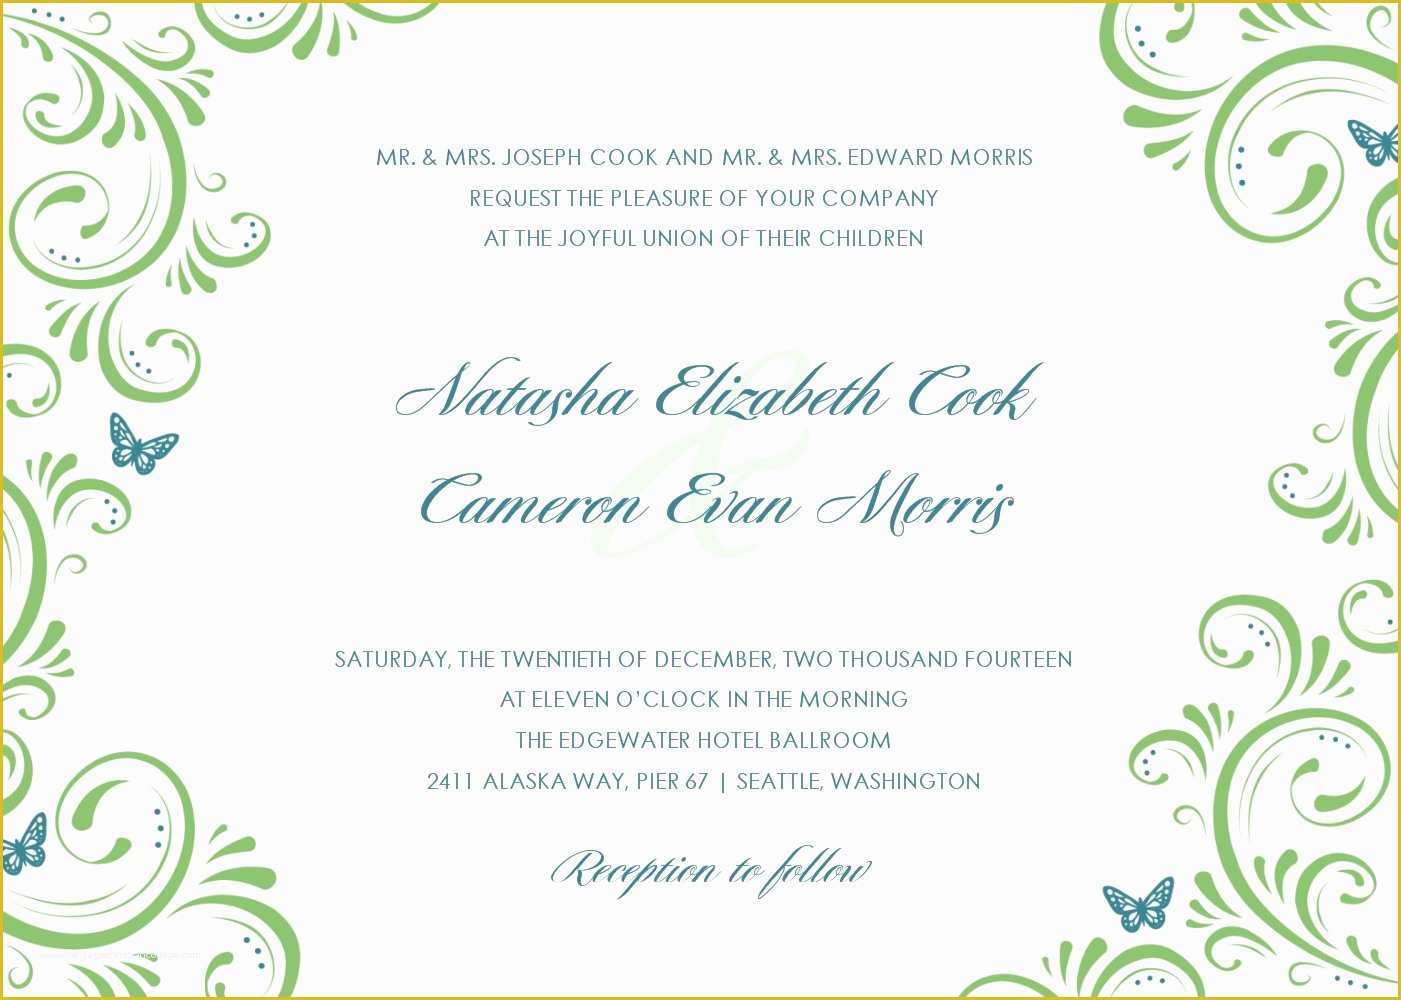 Wedding Invitation Ppt Templates Free Download Of Applying the Wedding Planning Templates